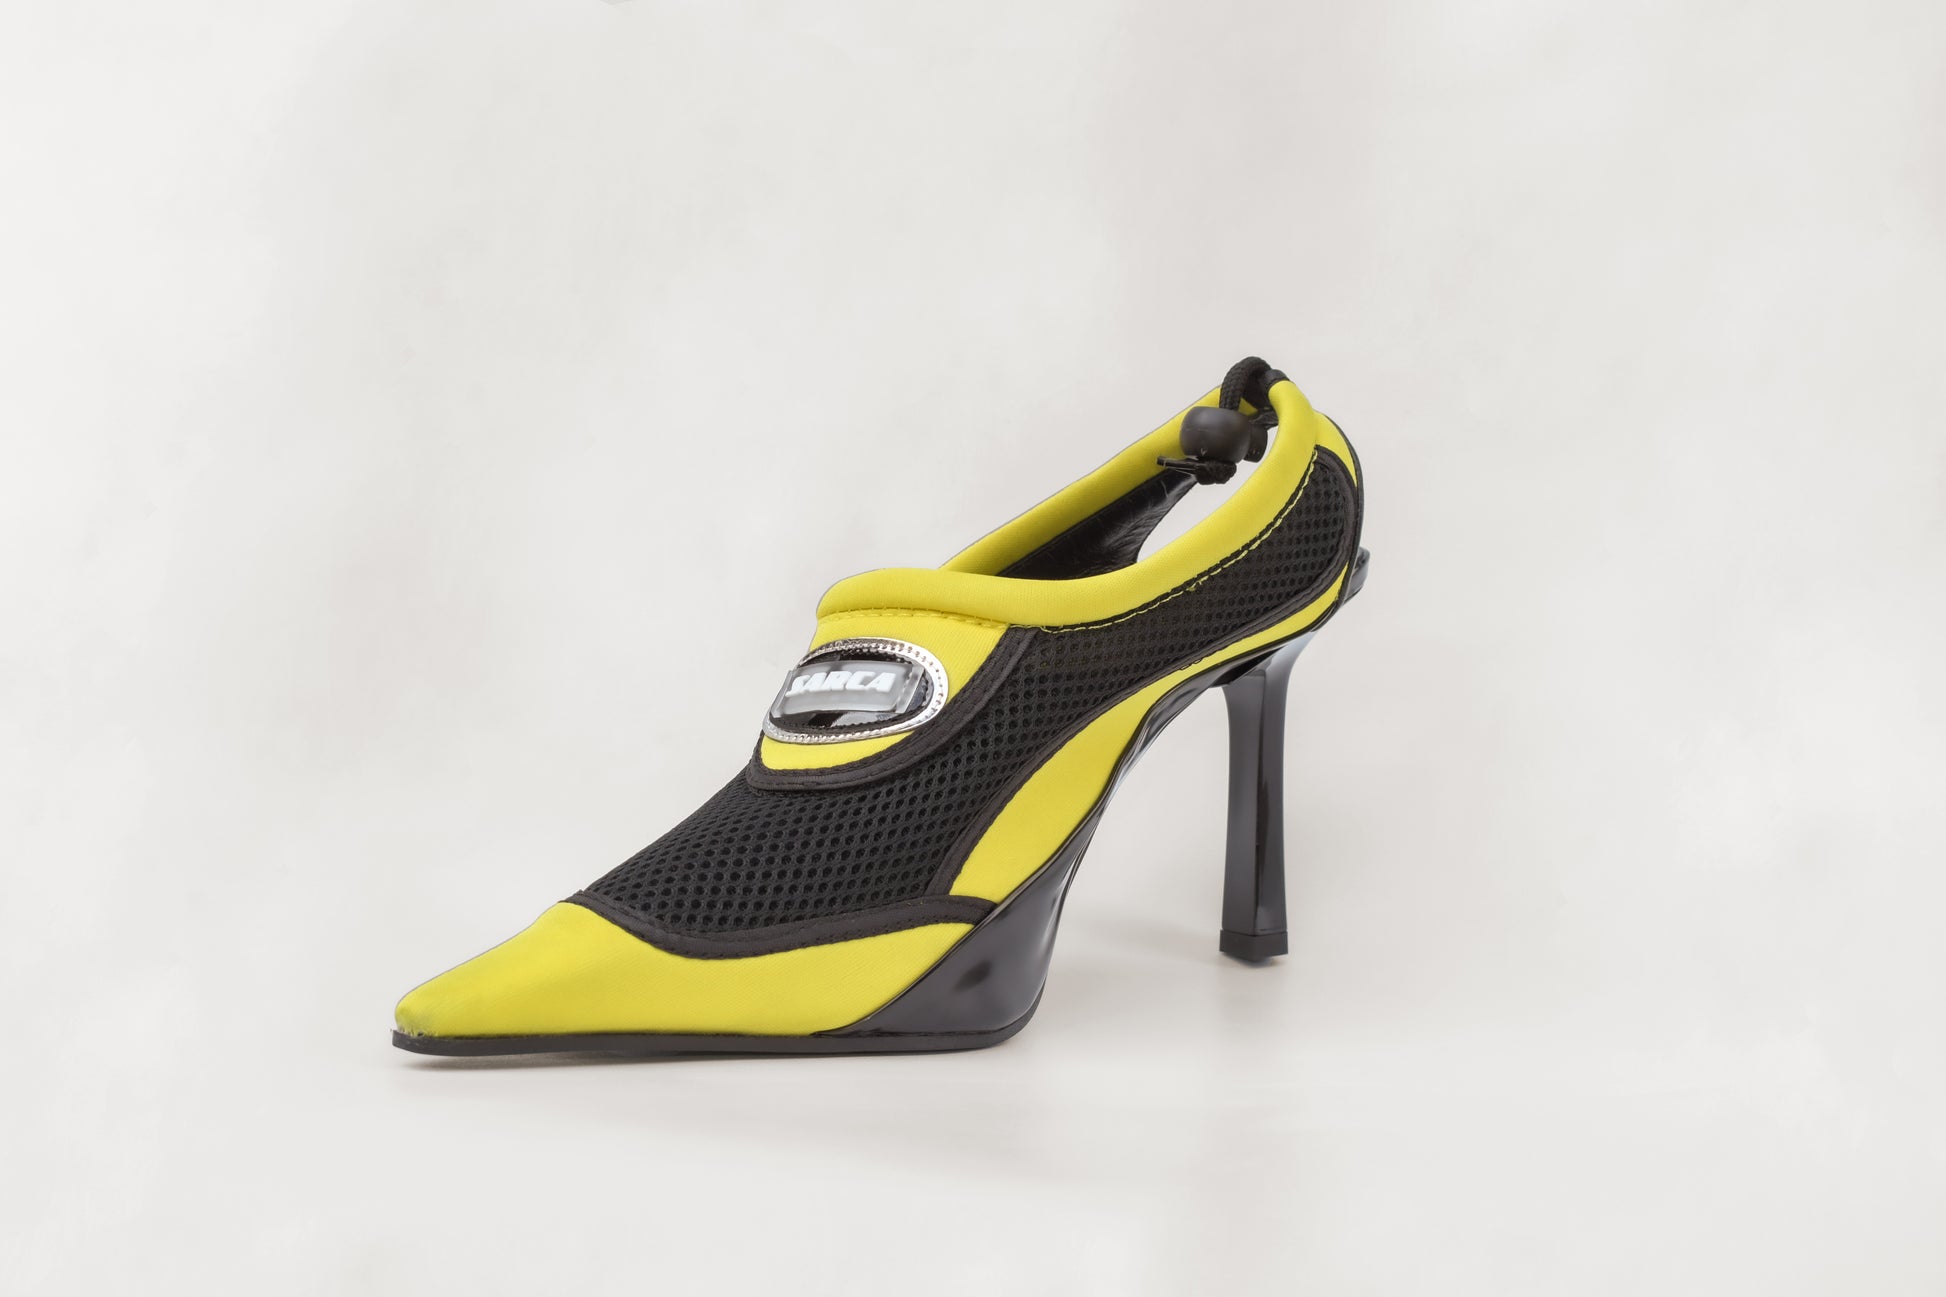 A photograph of the diagonal view of Ancuta Sarca Aqua Heel Black and Yellow shoe, 10CM HEEL, SLIP-ON STYLE, PANELLED DESIGN, TOGGLE BACK FASTENING, MADE IN ITALY